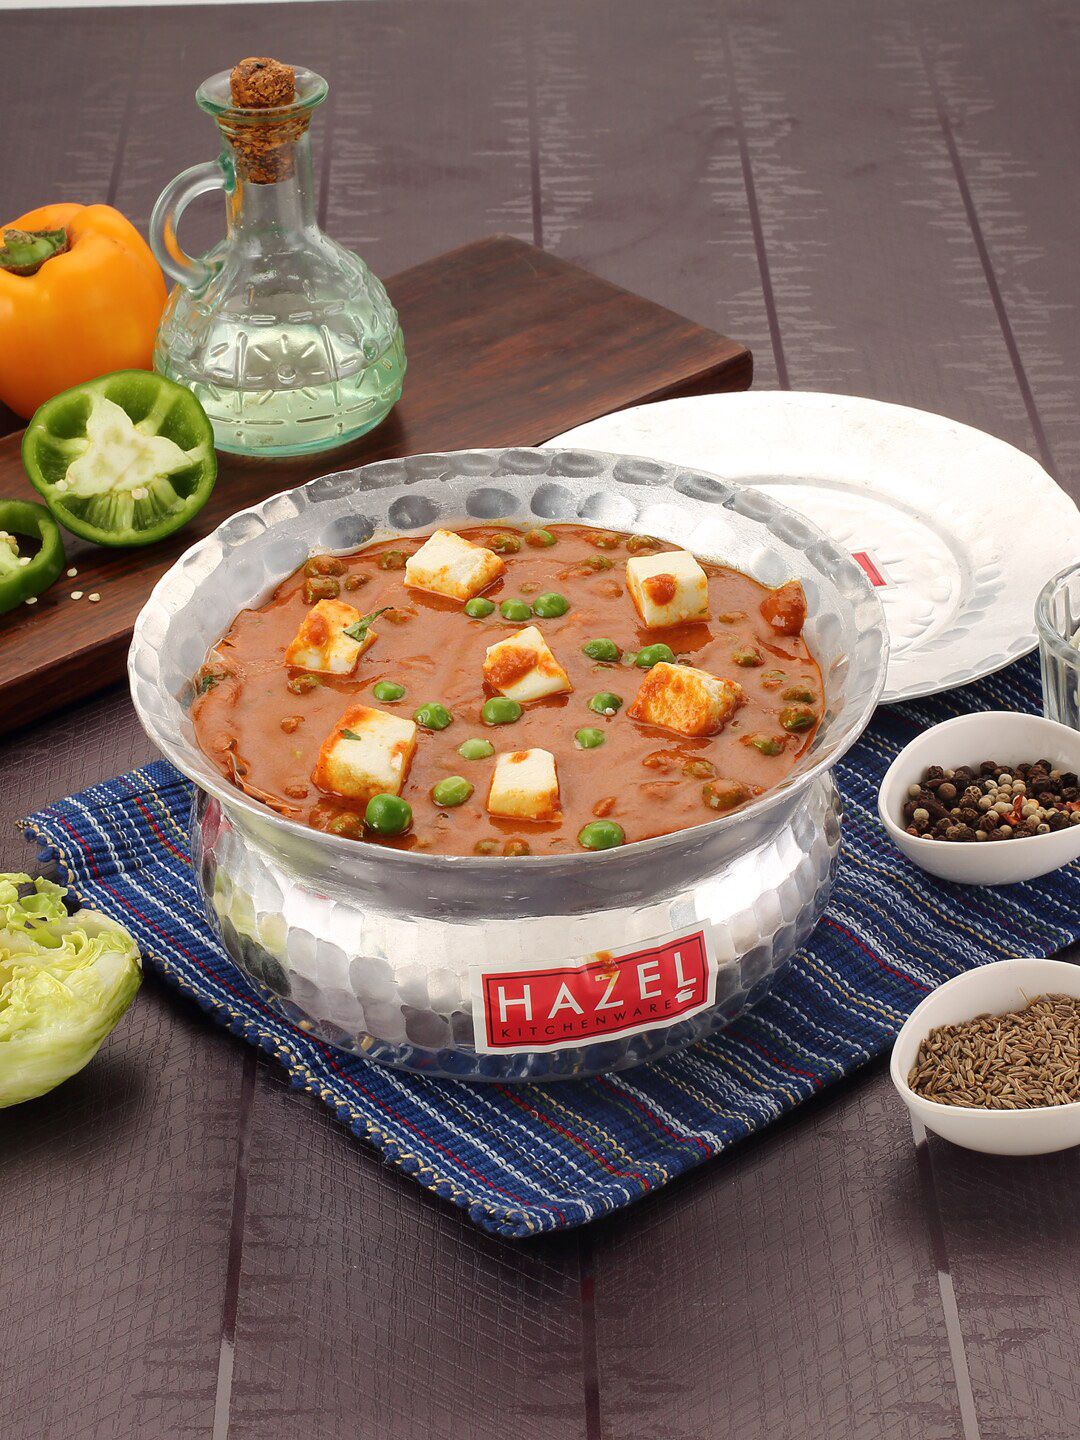 HAZEL Silver-Toned Hammered Handi Pot With Lid 2400 Ml Price in India